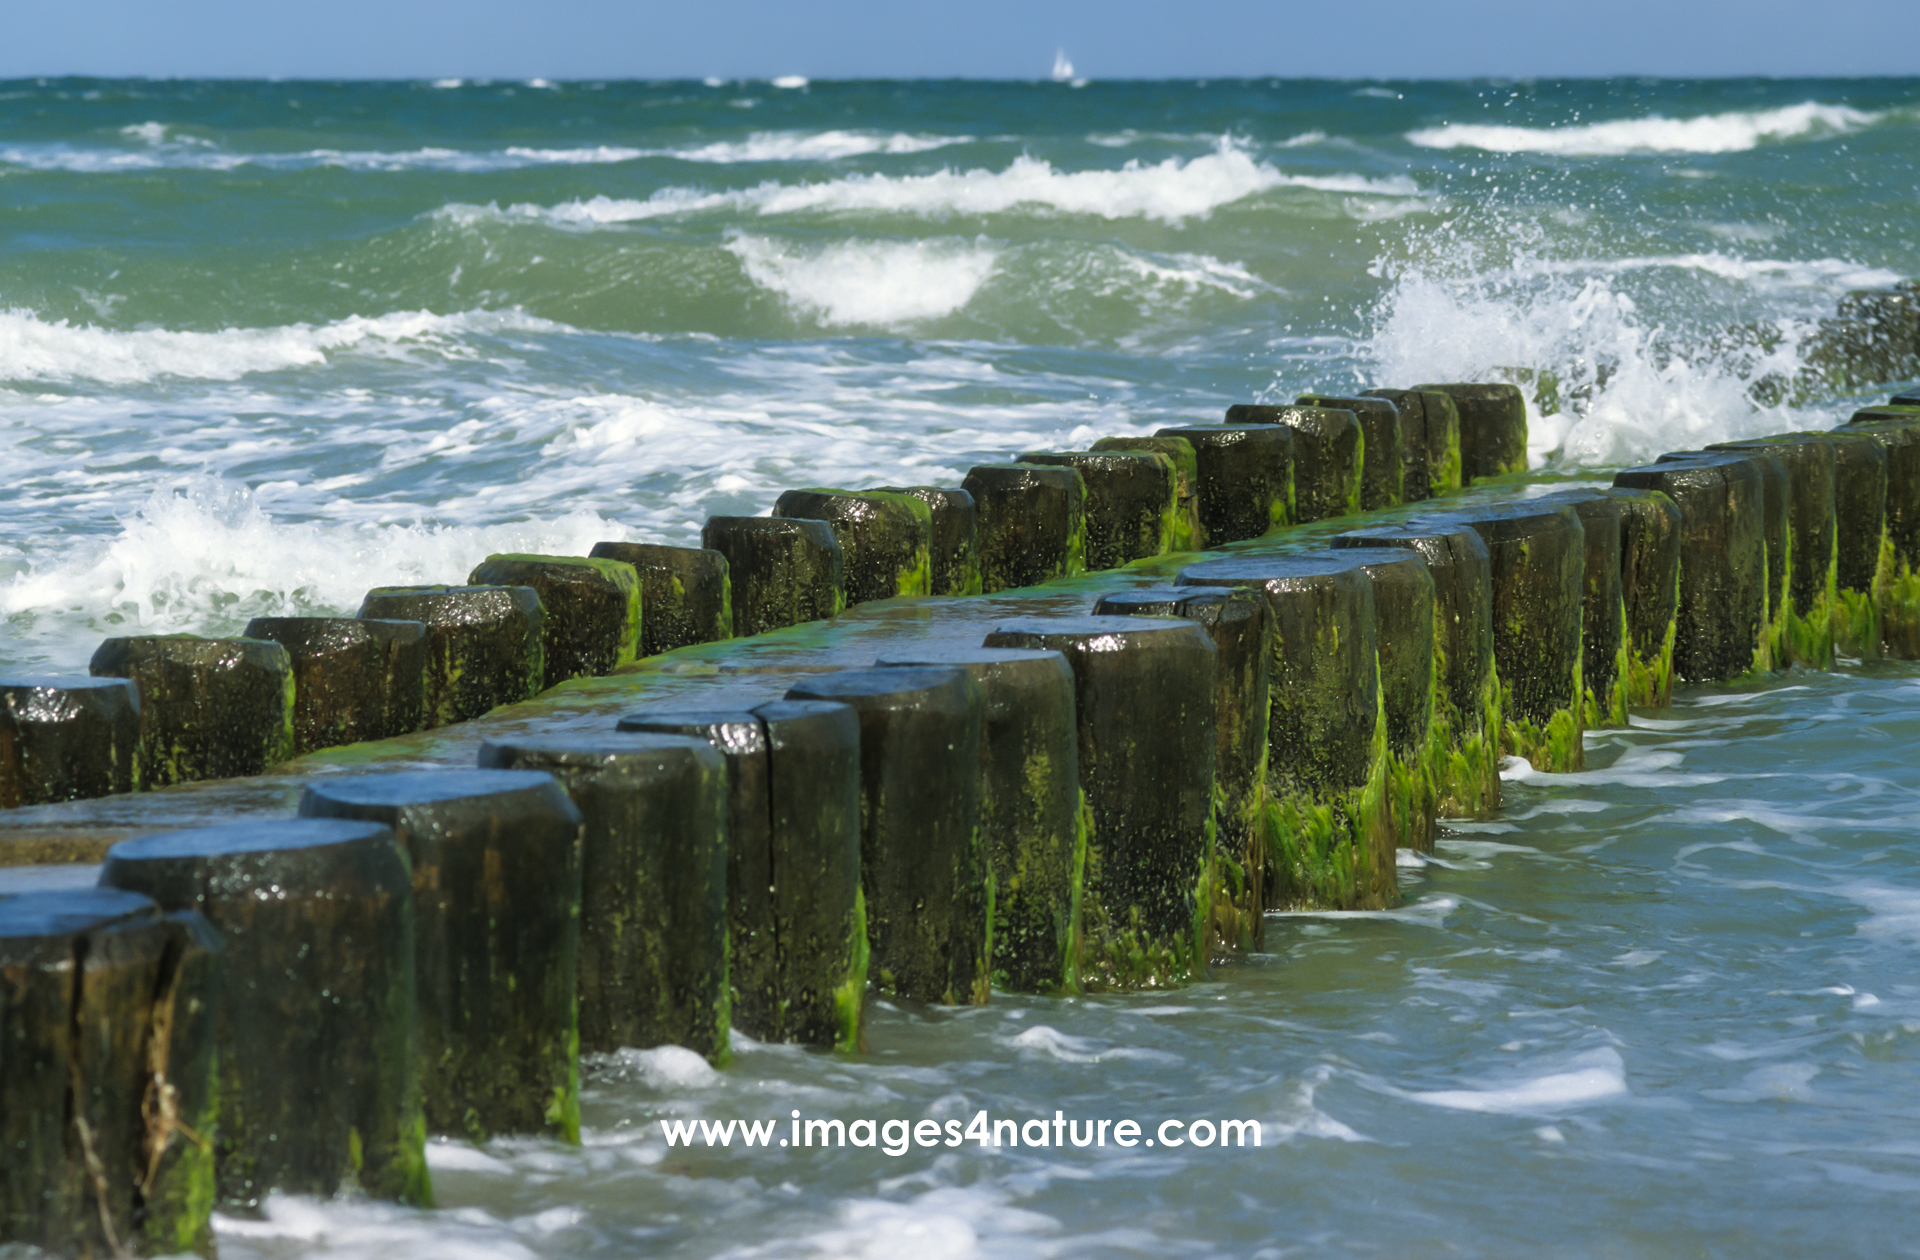 Diagonal double line of tree trunks as breakwater in the waves of the Baltic Sea